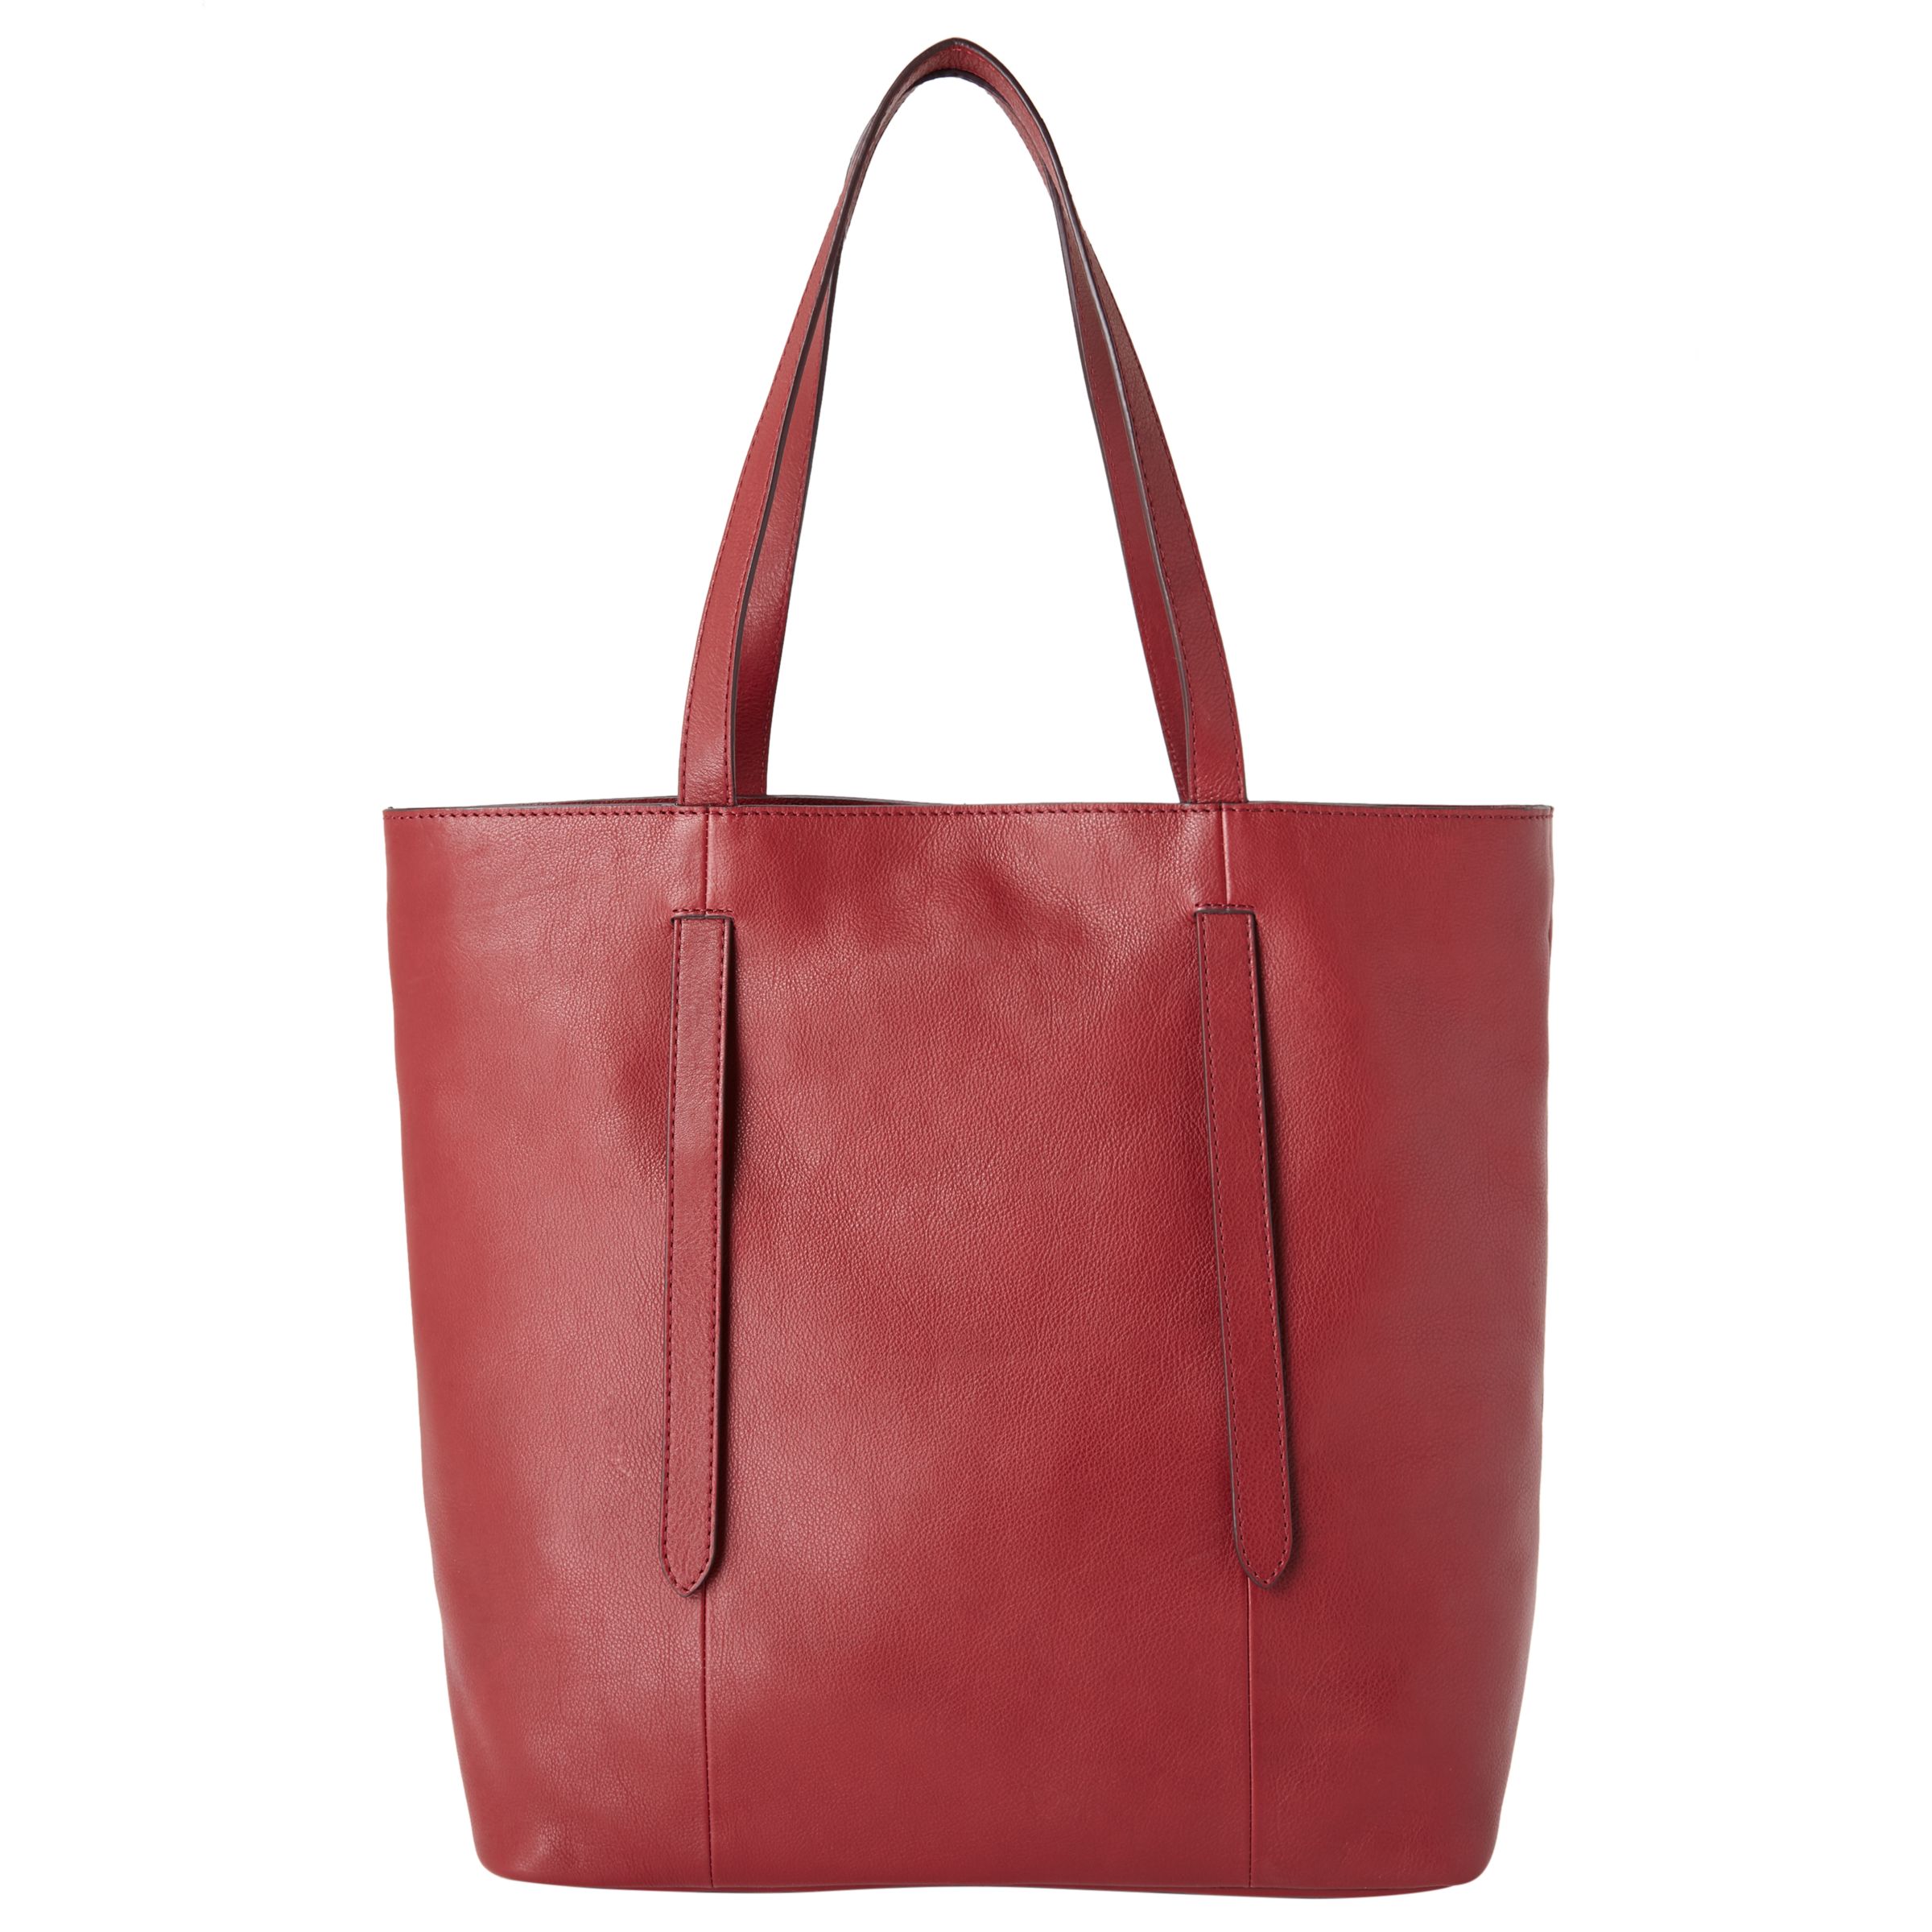 John Lewis & Partners Cecilia Leather North / South Tote Bag